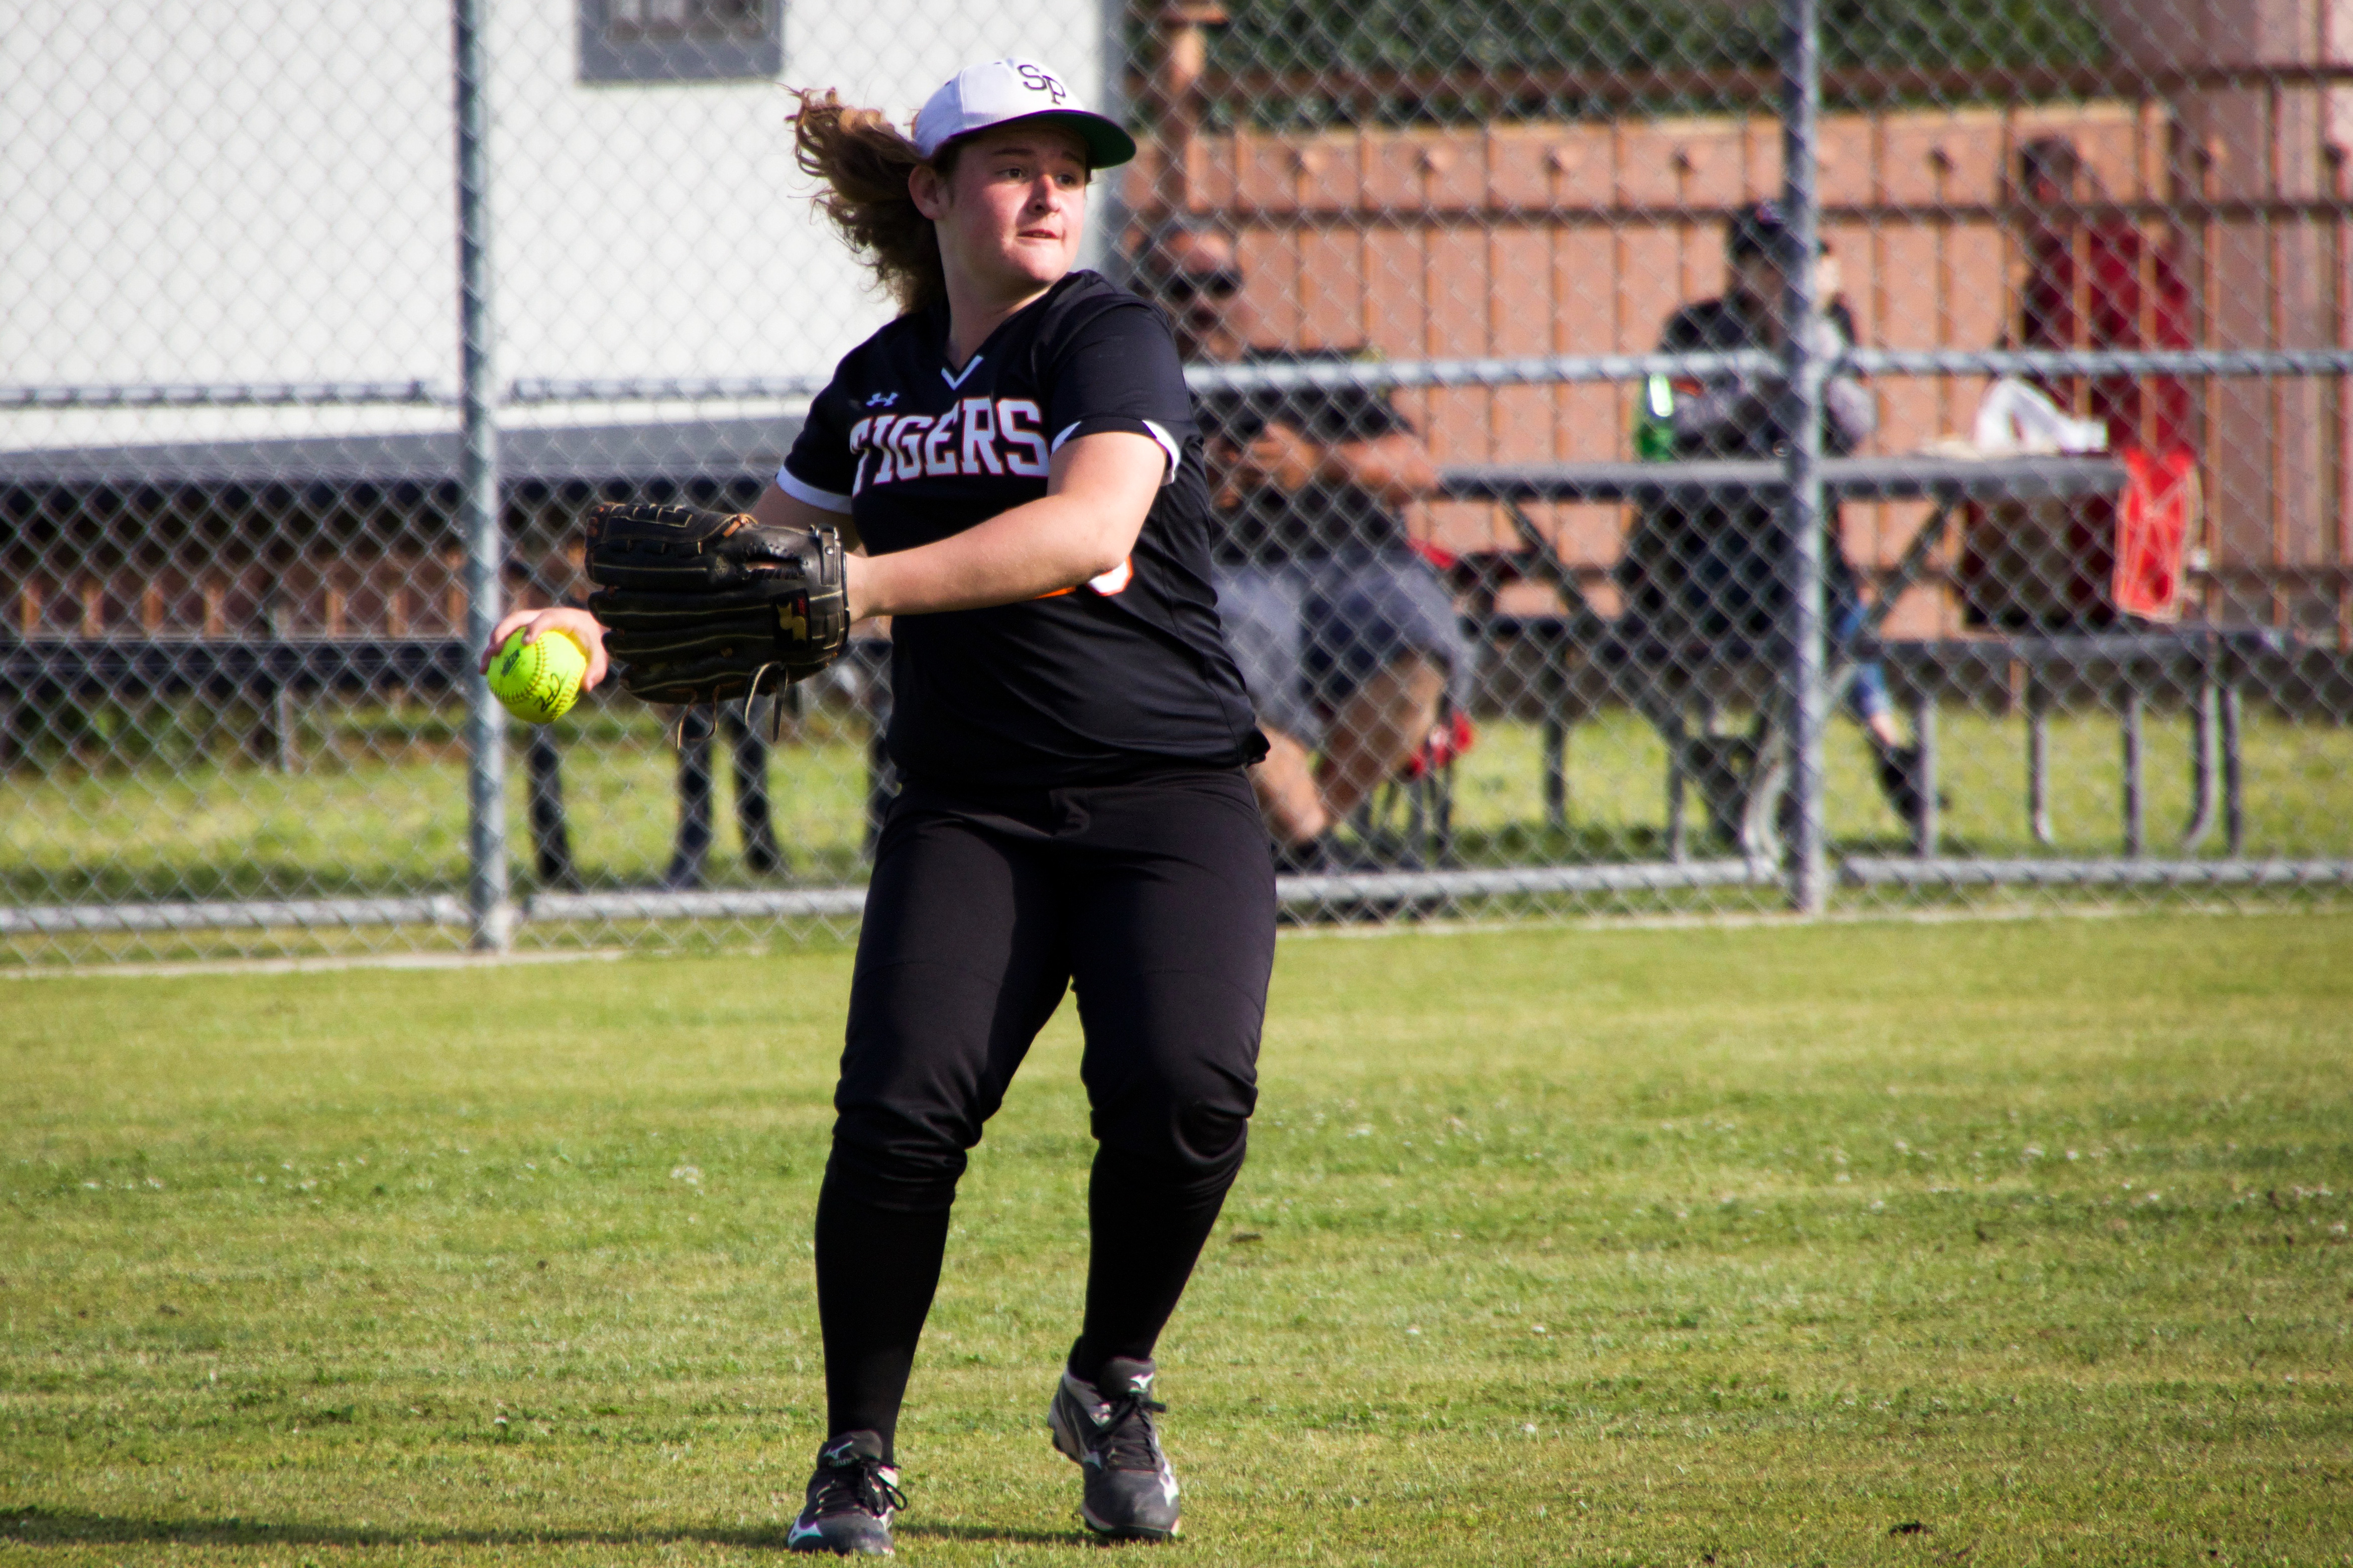 Thumbnail for Softball earns first league victory in two years